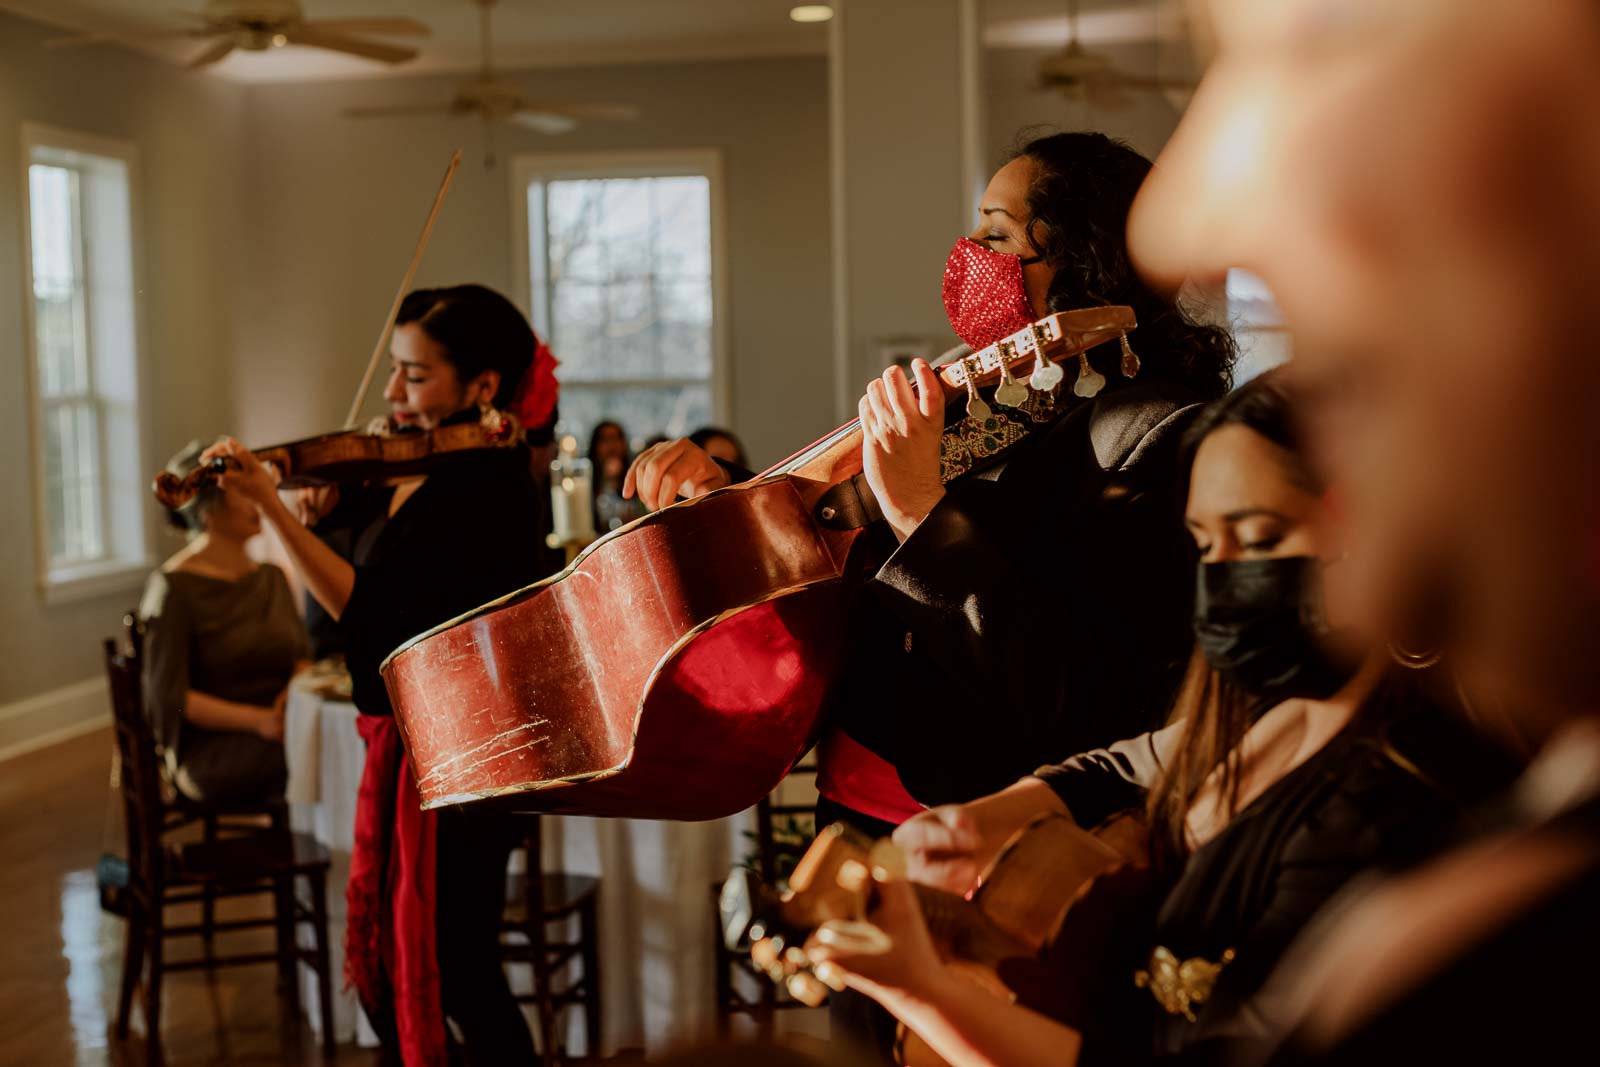 Mariachis play at sunset in the wedding reception